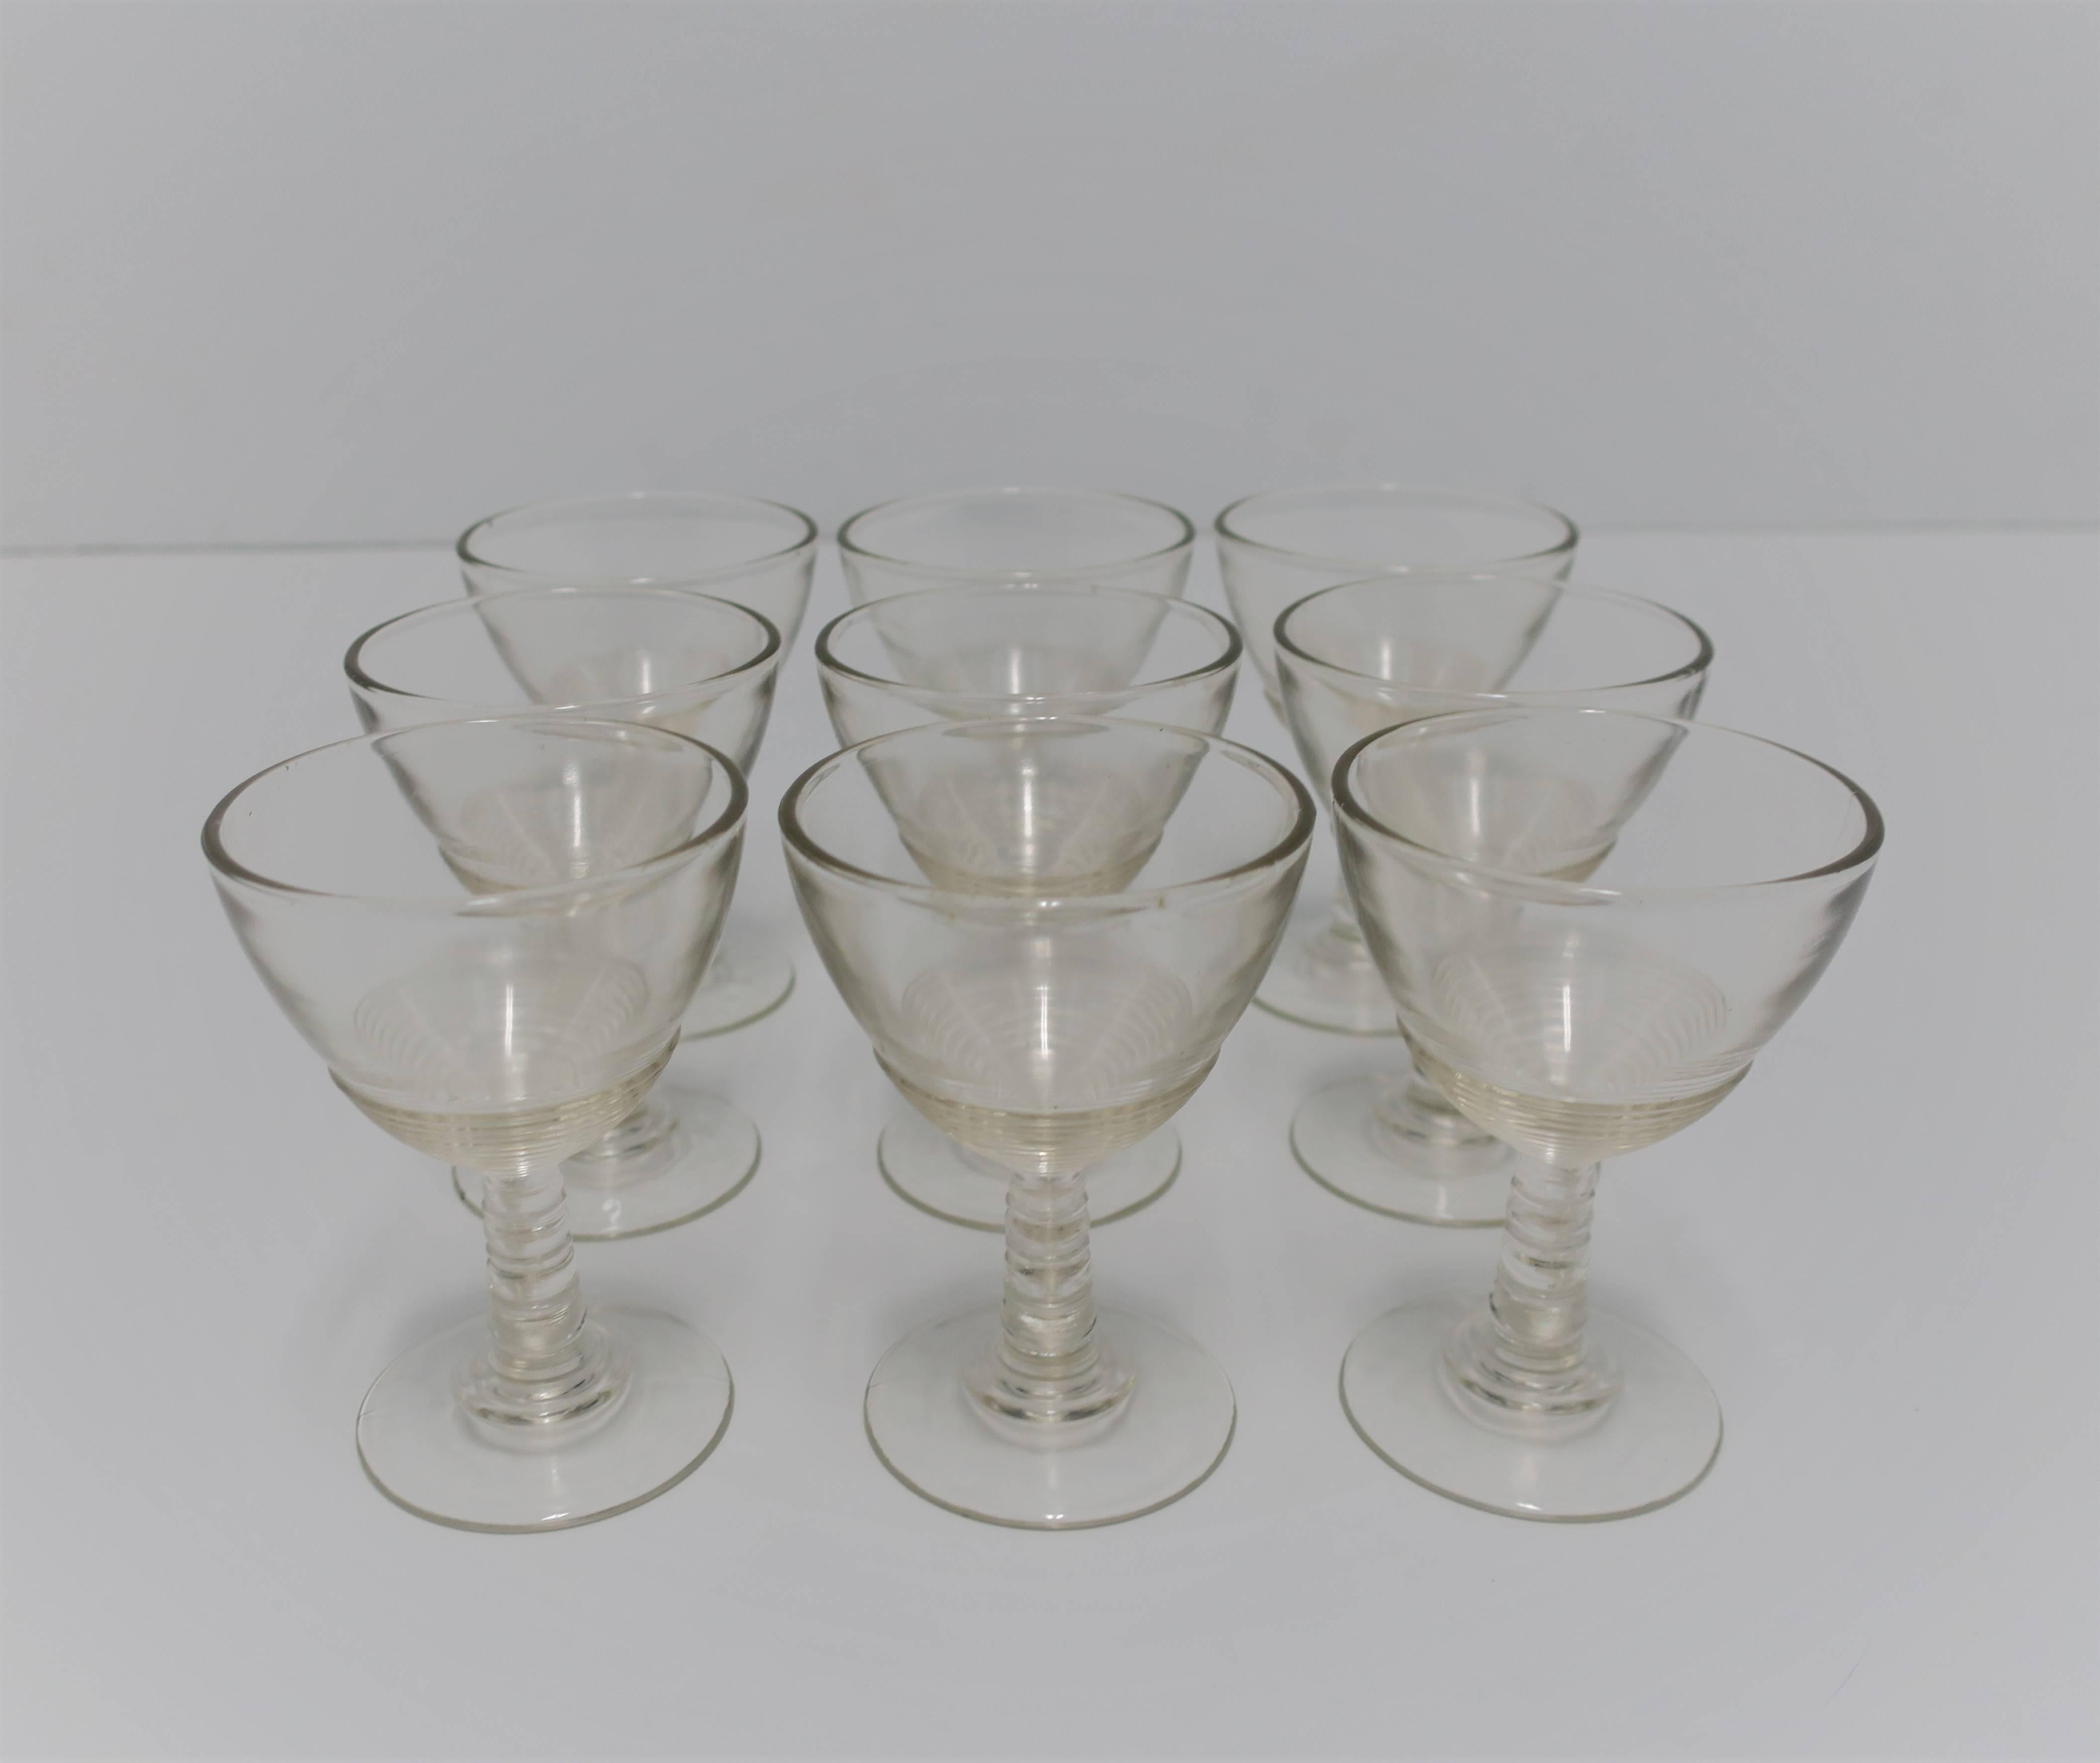 Early 20th Century Modern Clear Glassware Set of 9, circa 1920s